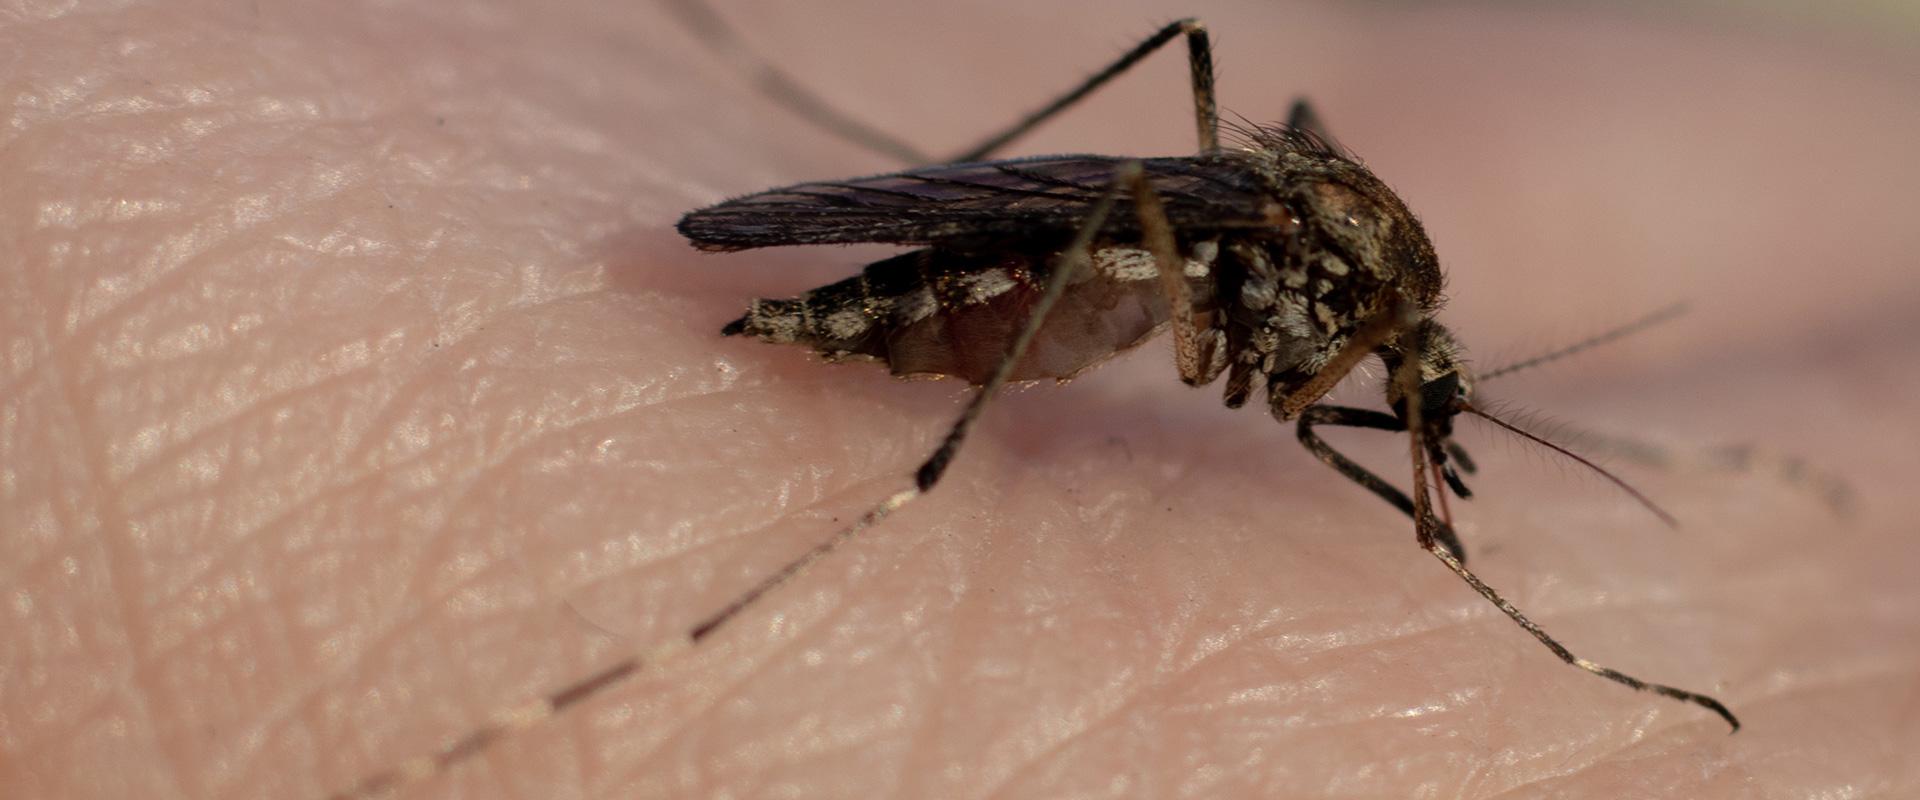 a mosquito biting a persons hand